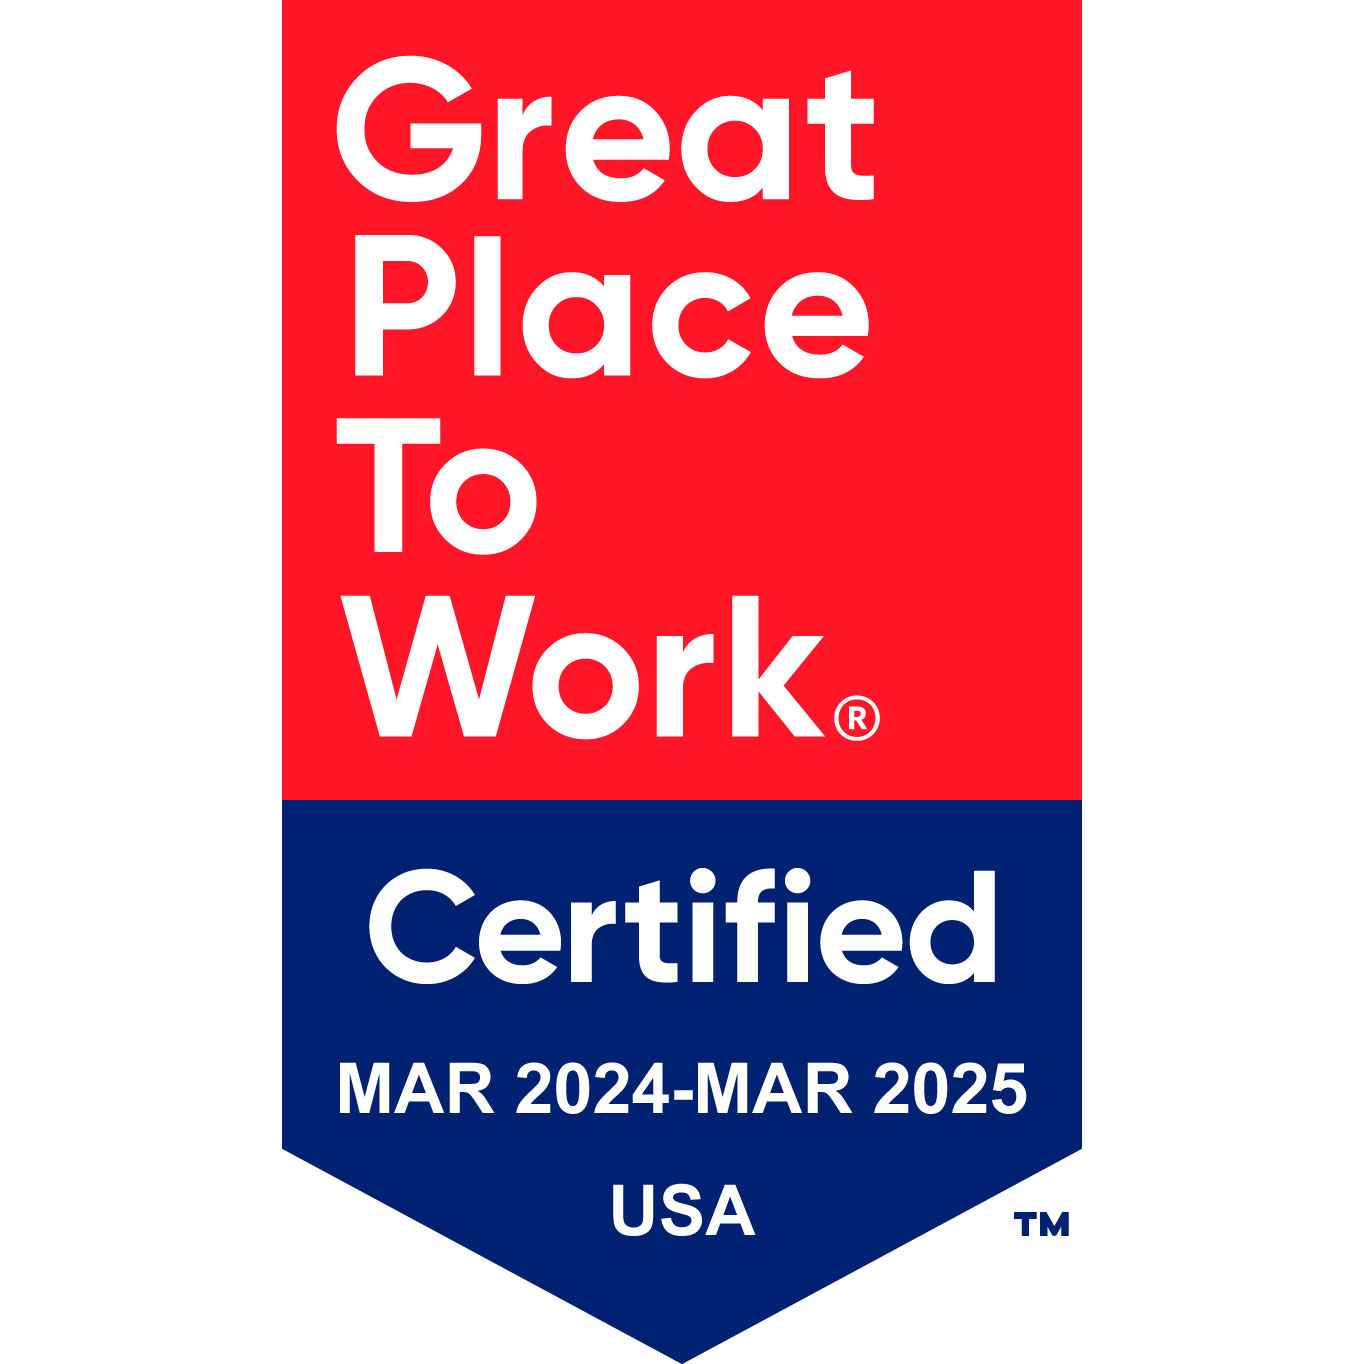 Our Great Place to Work Certification Badge